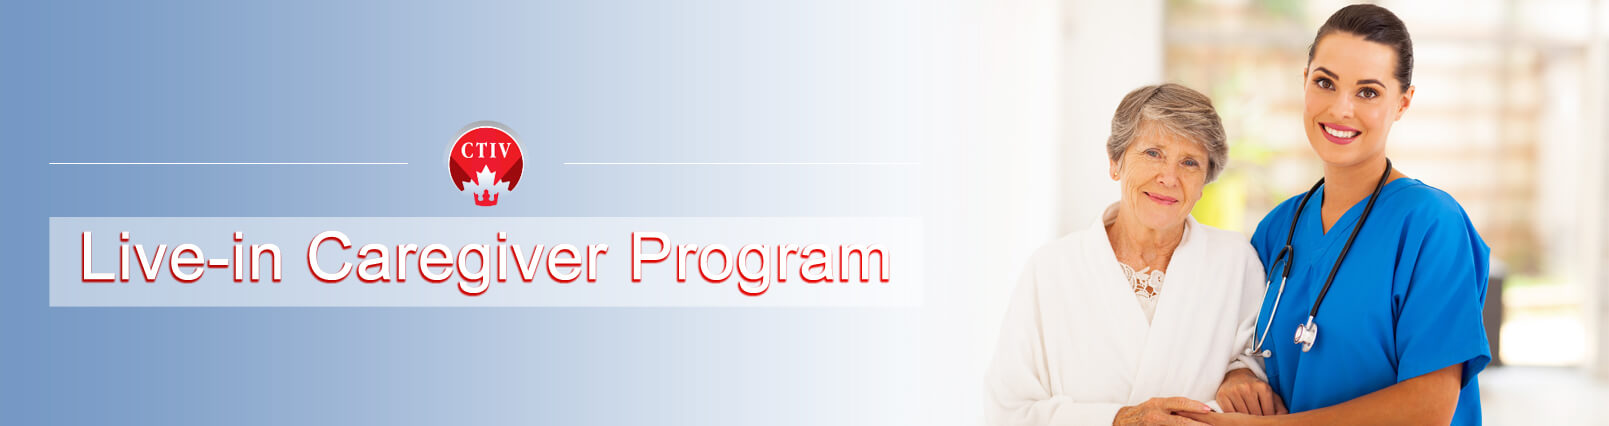 Live In Caregiver Program Lcp Canada Canadian Title Immigration And